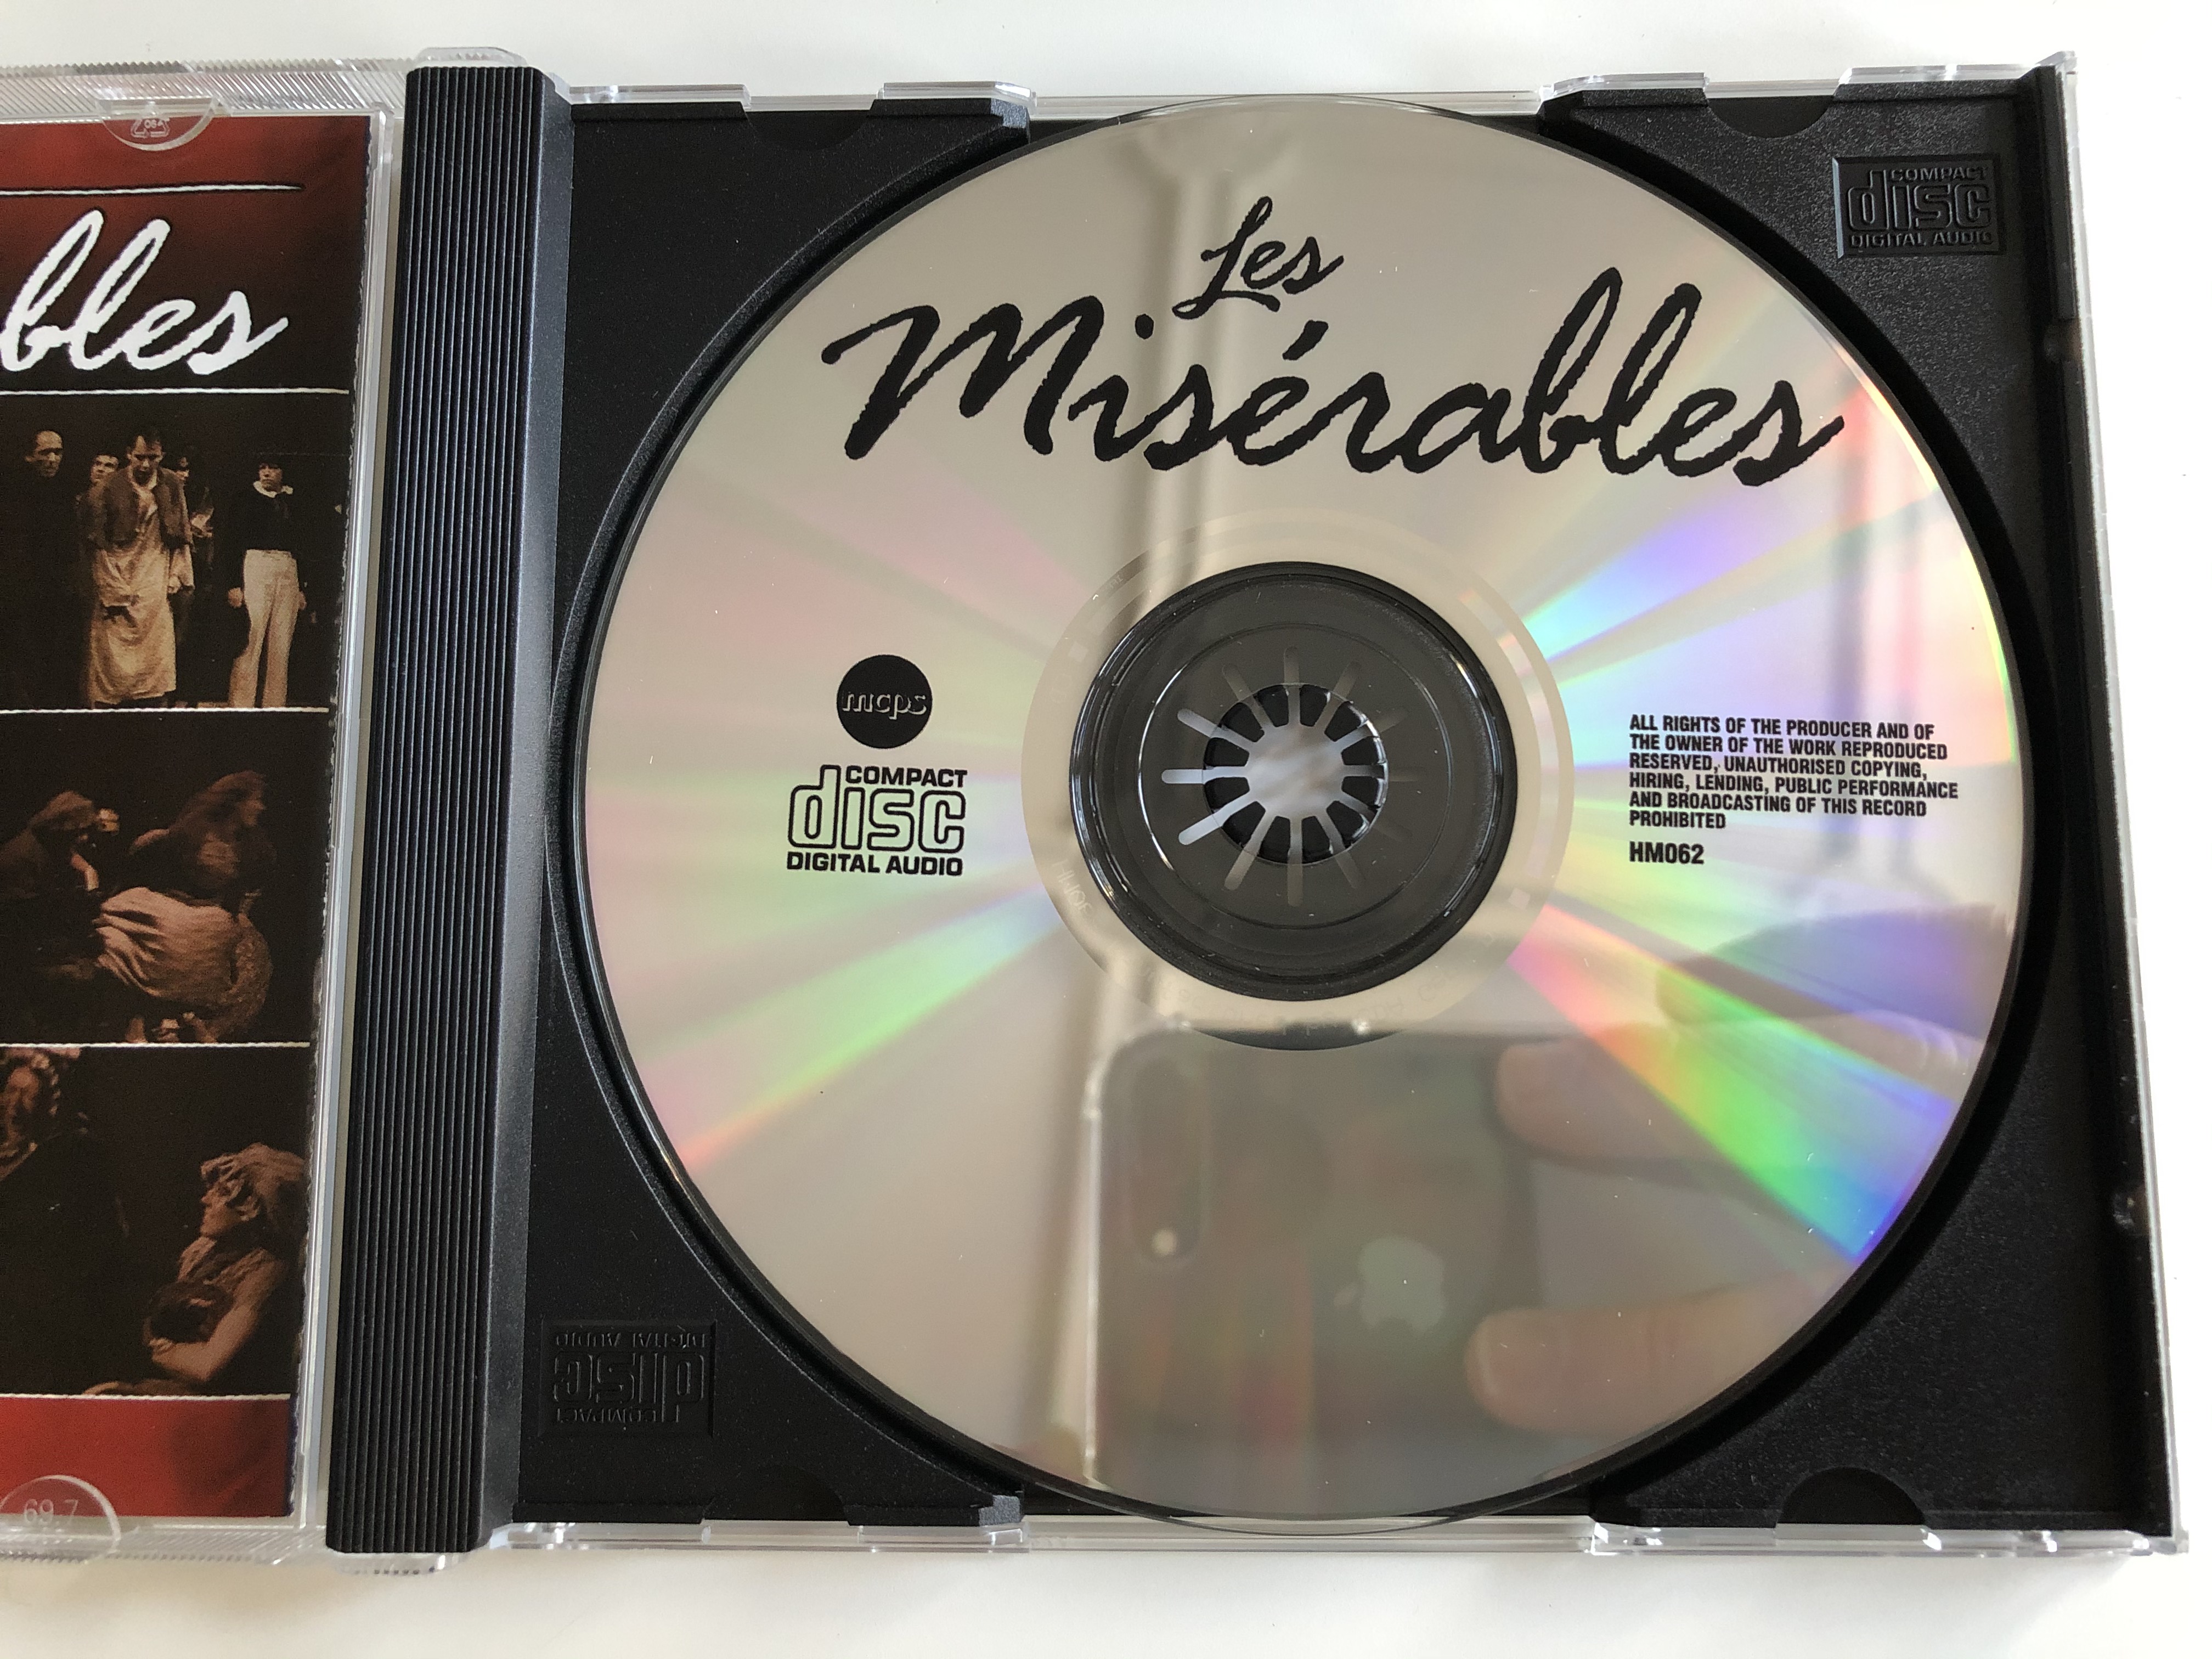 les-miserables-the-musical-who-am-i-come-to-me-stars-on-my-own-performed-by-the-musical-singers-orchestra-harmony-audio-cd-2001-hm062-3-.jpg